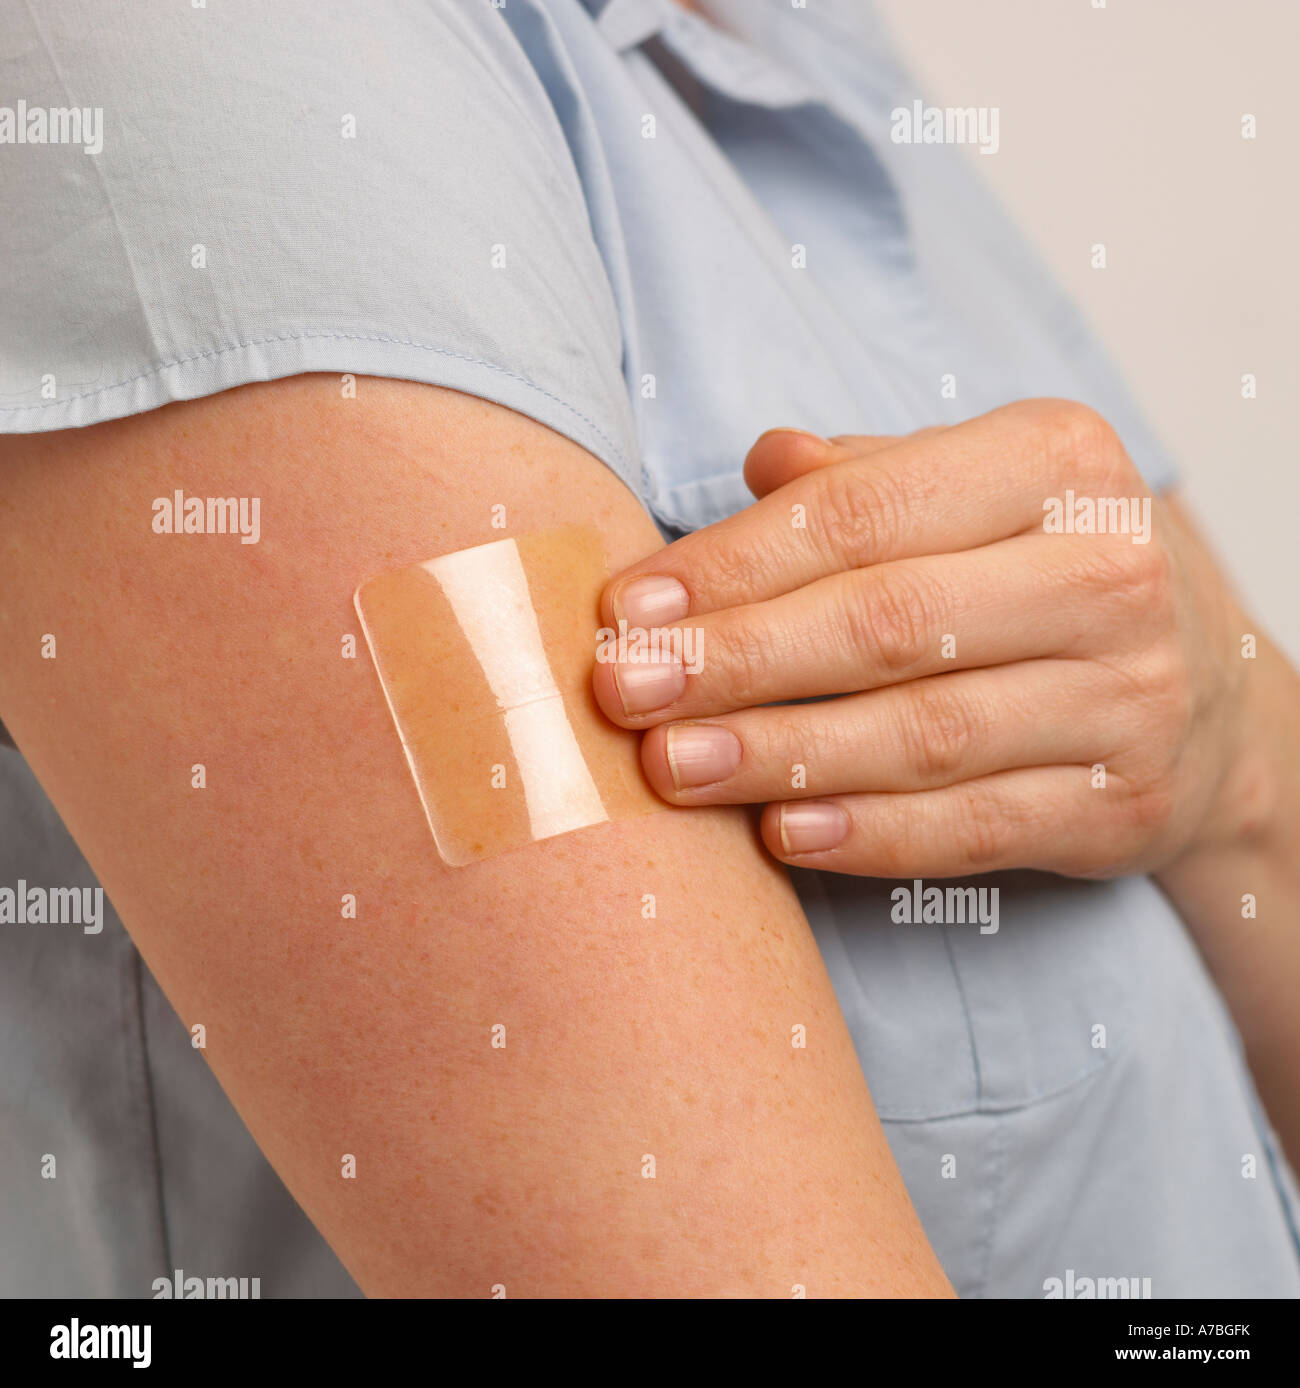 ATTRACTIVE HEALTHY YOUNG BLOND WOMAN APPLYING TRANSPARENT NICOTINE PATCH TO ARM Stock Photo